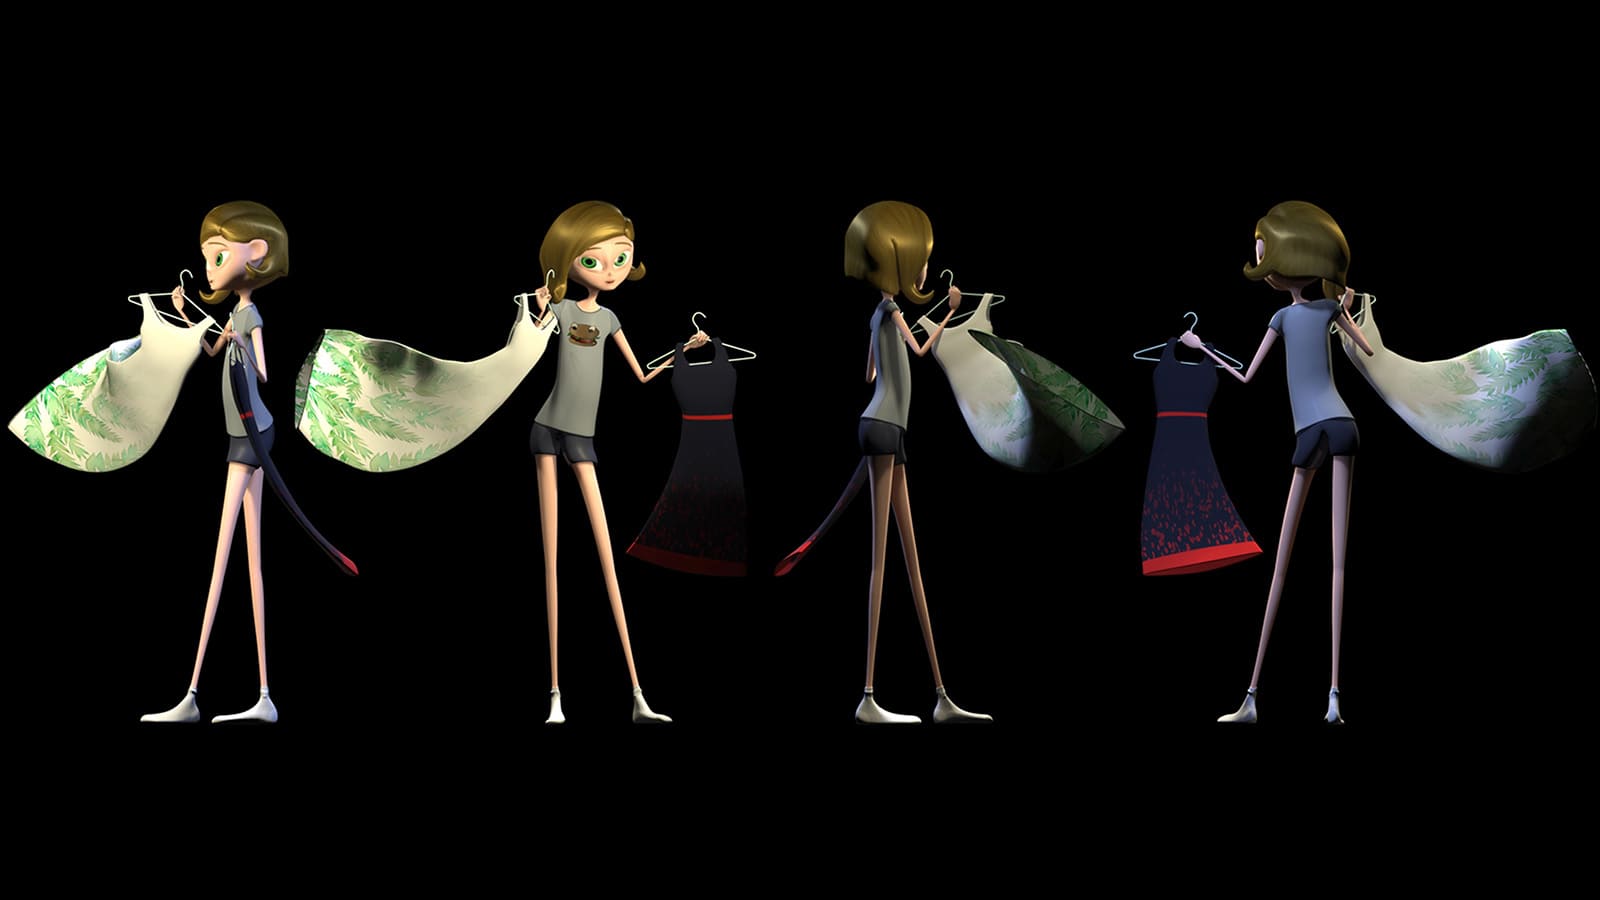 A turnaround of Skye, the protagonist, showcasing two of her dresses on hangers to decide which one is most appropriate for her date.